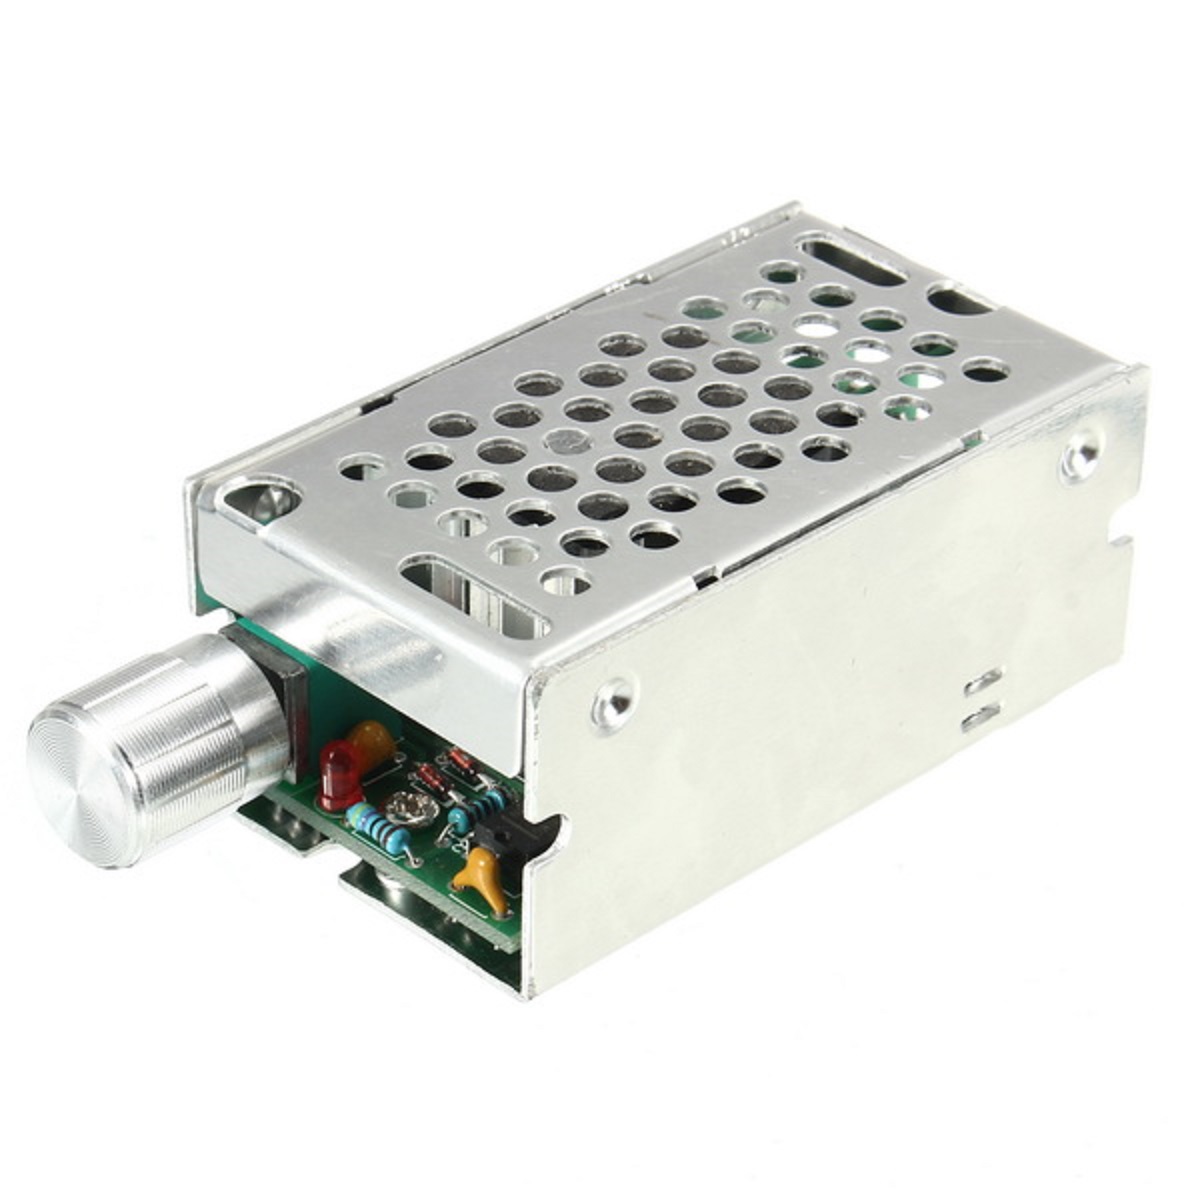 Machifit-12-36V-30A-500W-Adjustable-Speed-Controller-DC-Brush-Motor-Speed-PWM-Controller-1122362-1